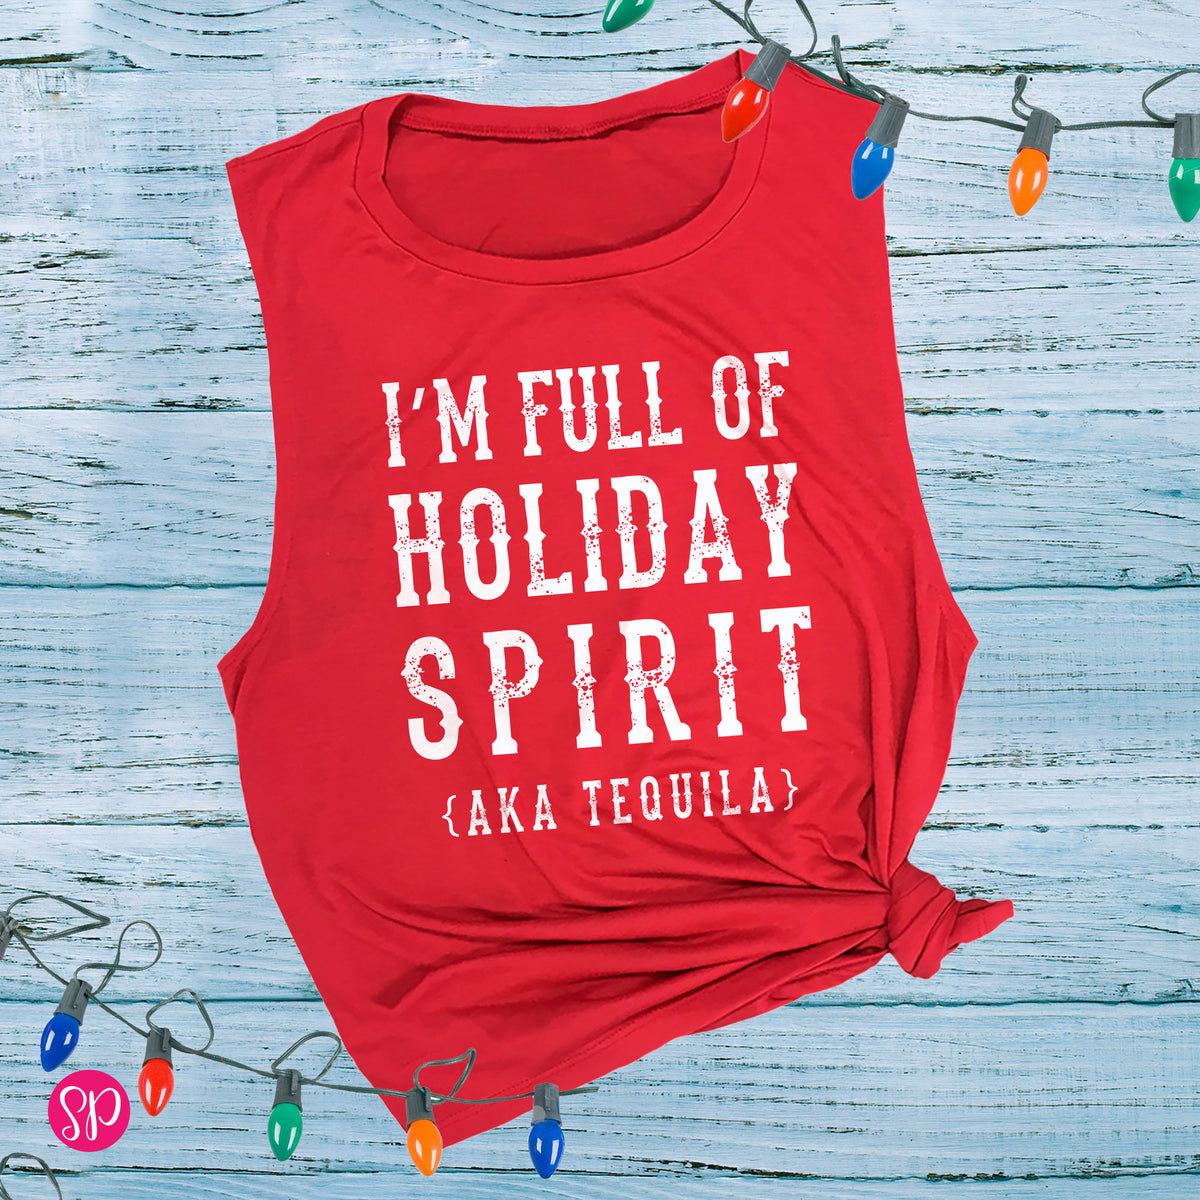 I'm Full of Holiday Spirit AKA Tequila Funny Workout Fitness Drinking Tank Top Women